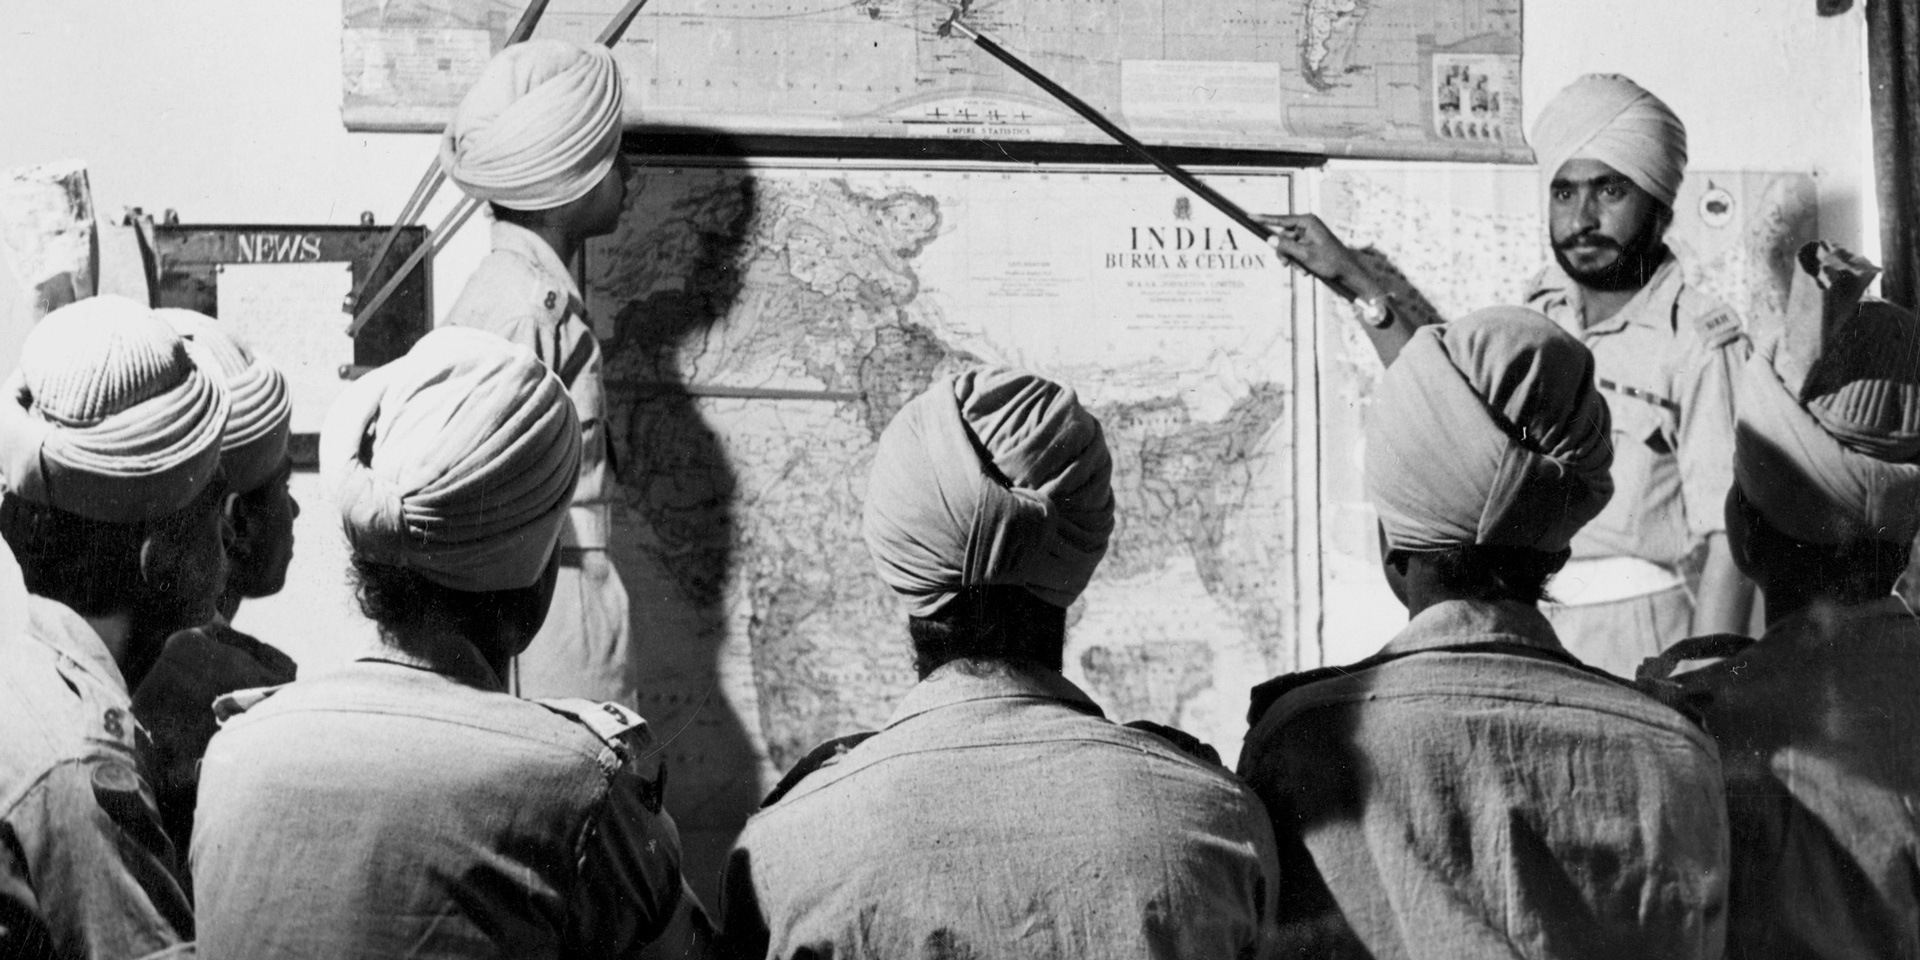 Map briefing for Sikh recruits, 1947